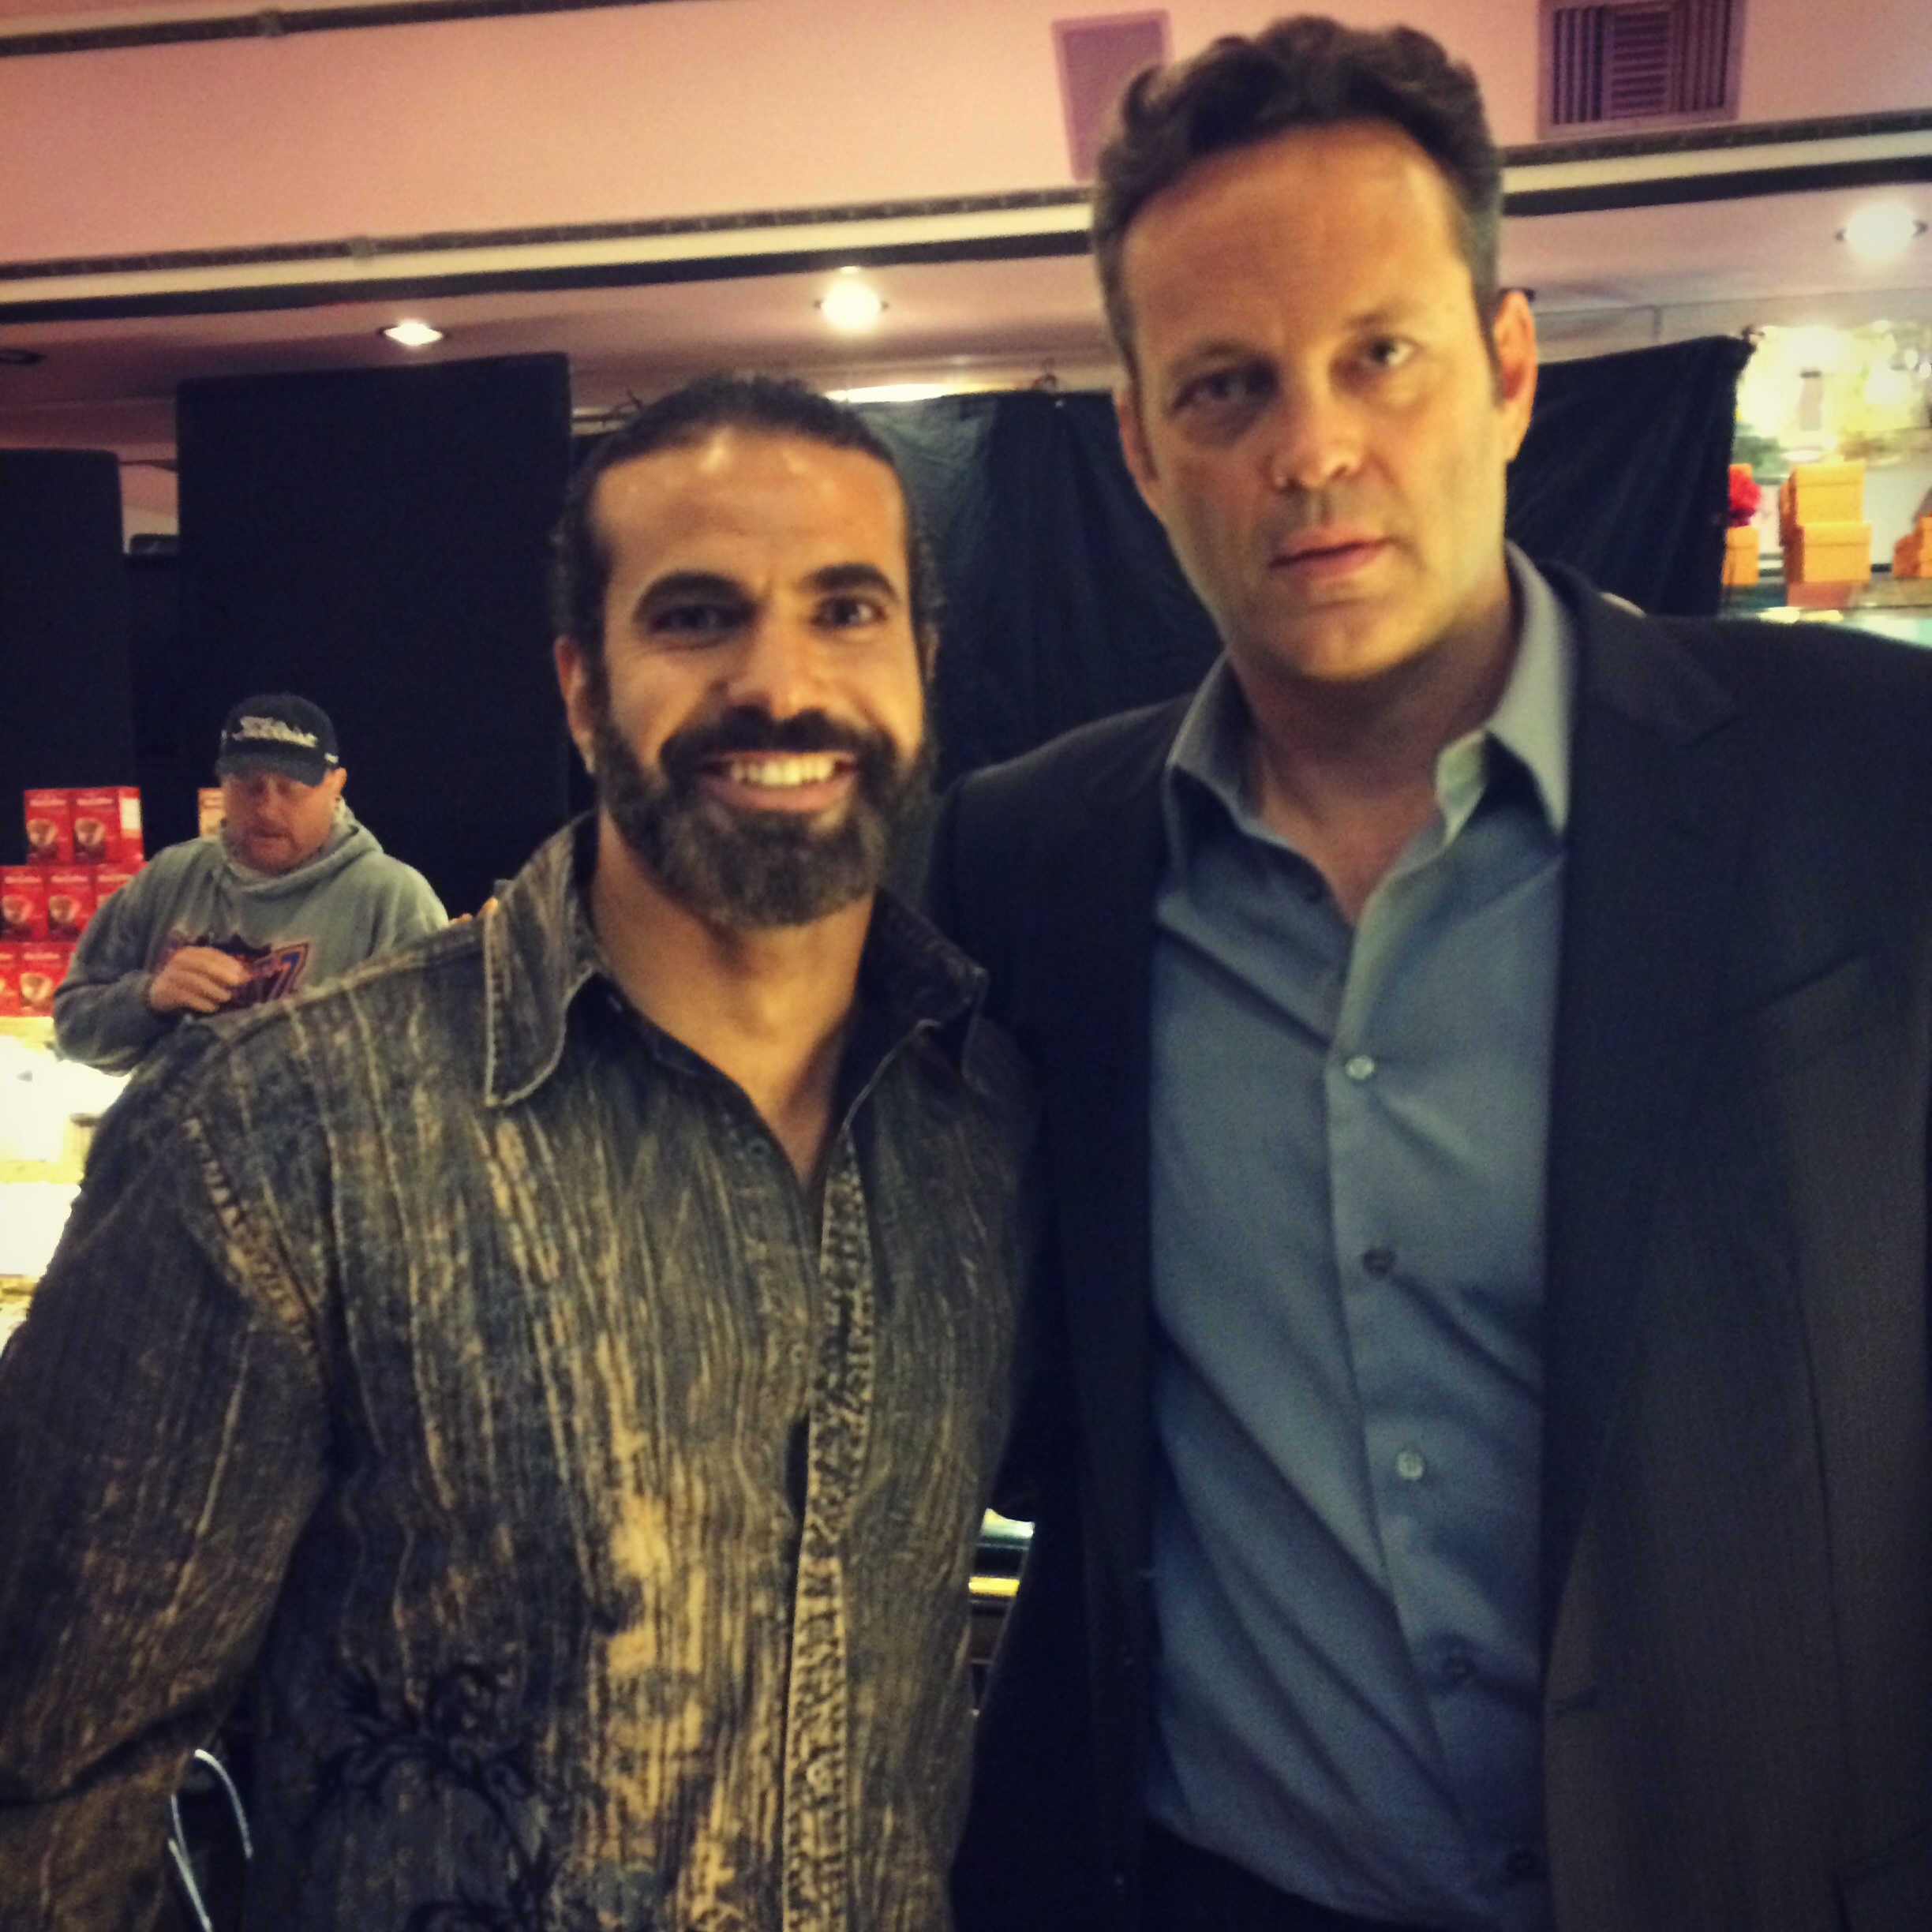 Working with Vince Vaughn was incredible by all means